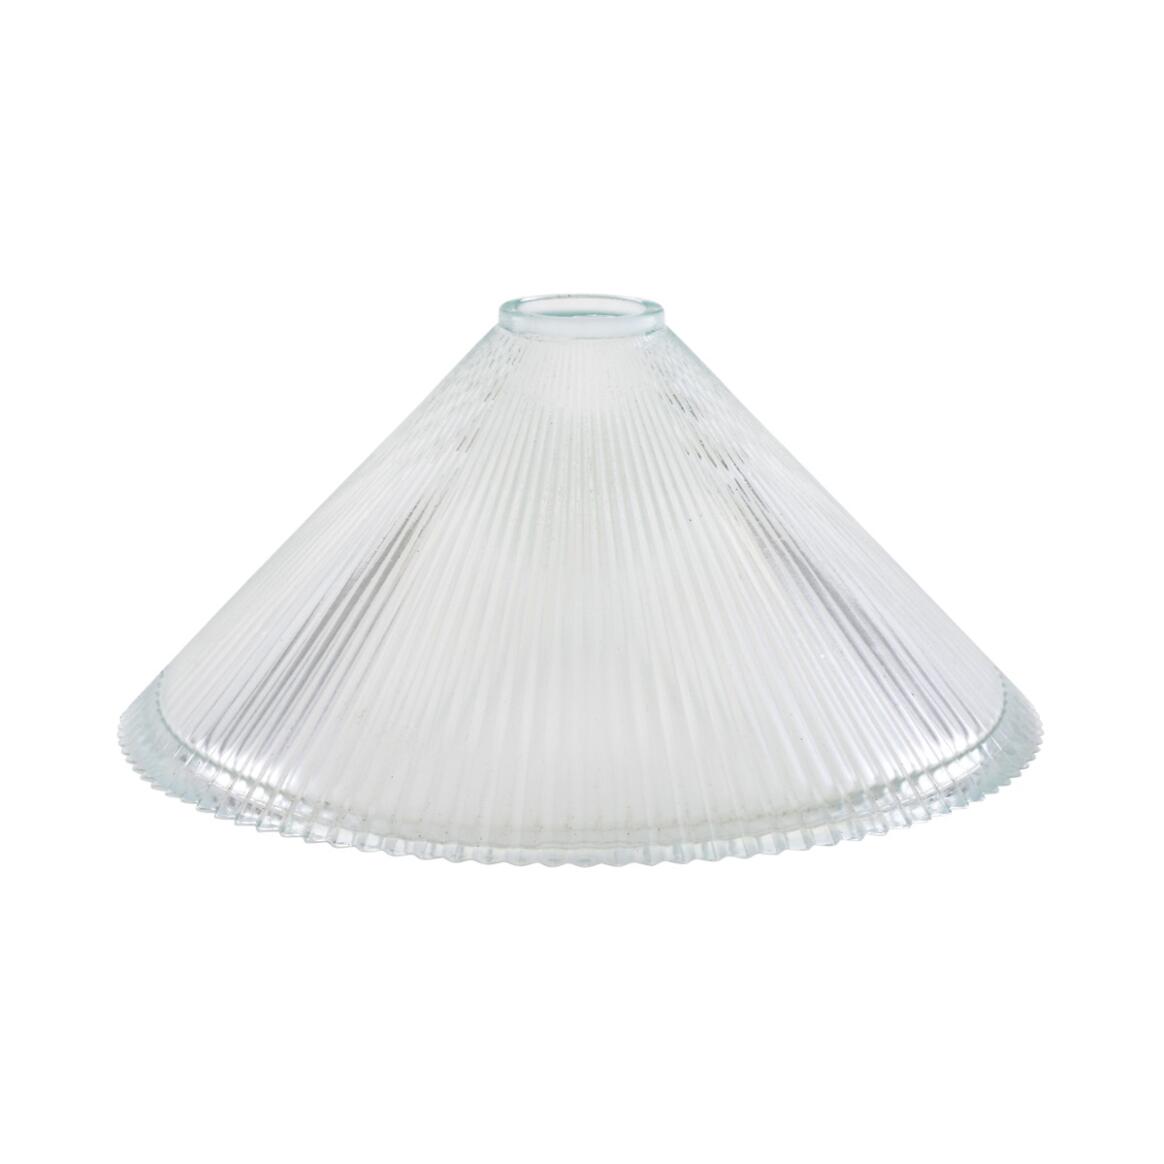 11.8" Holophane chandelier glass shade main product image